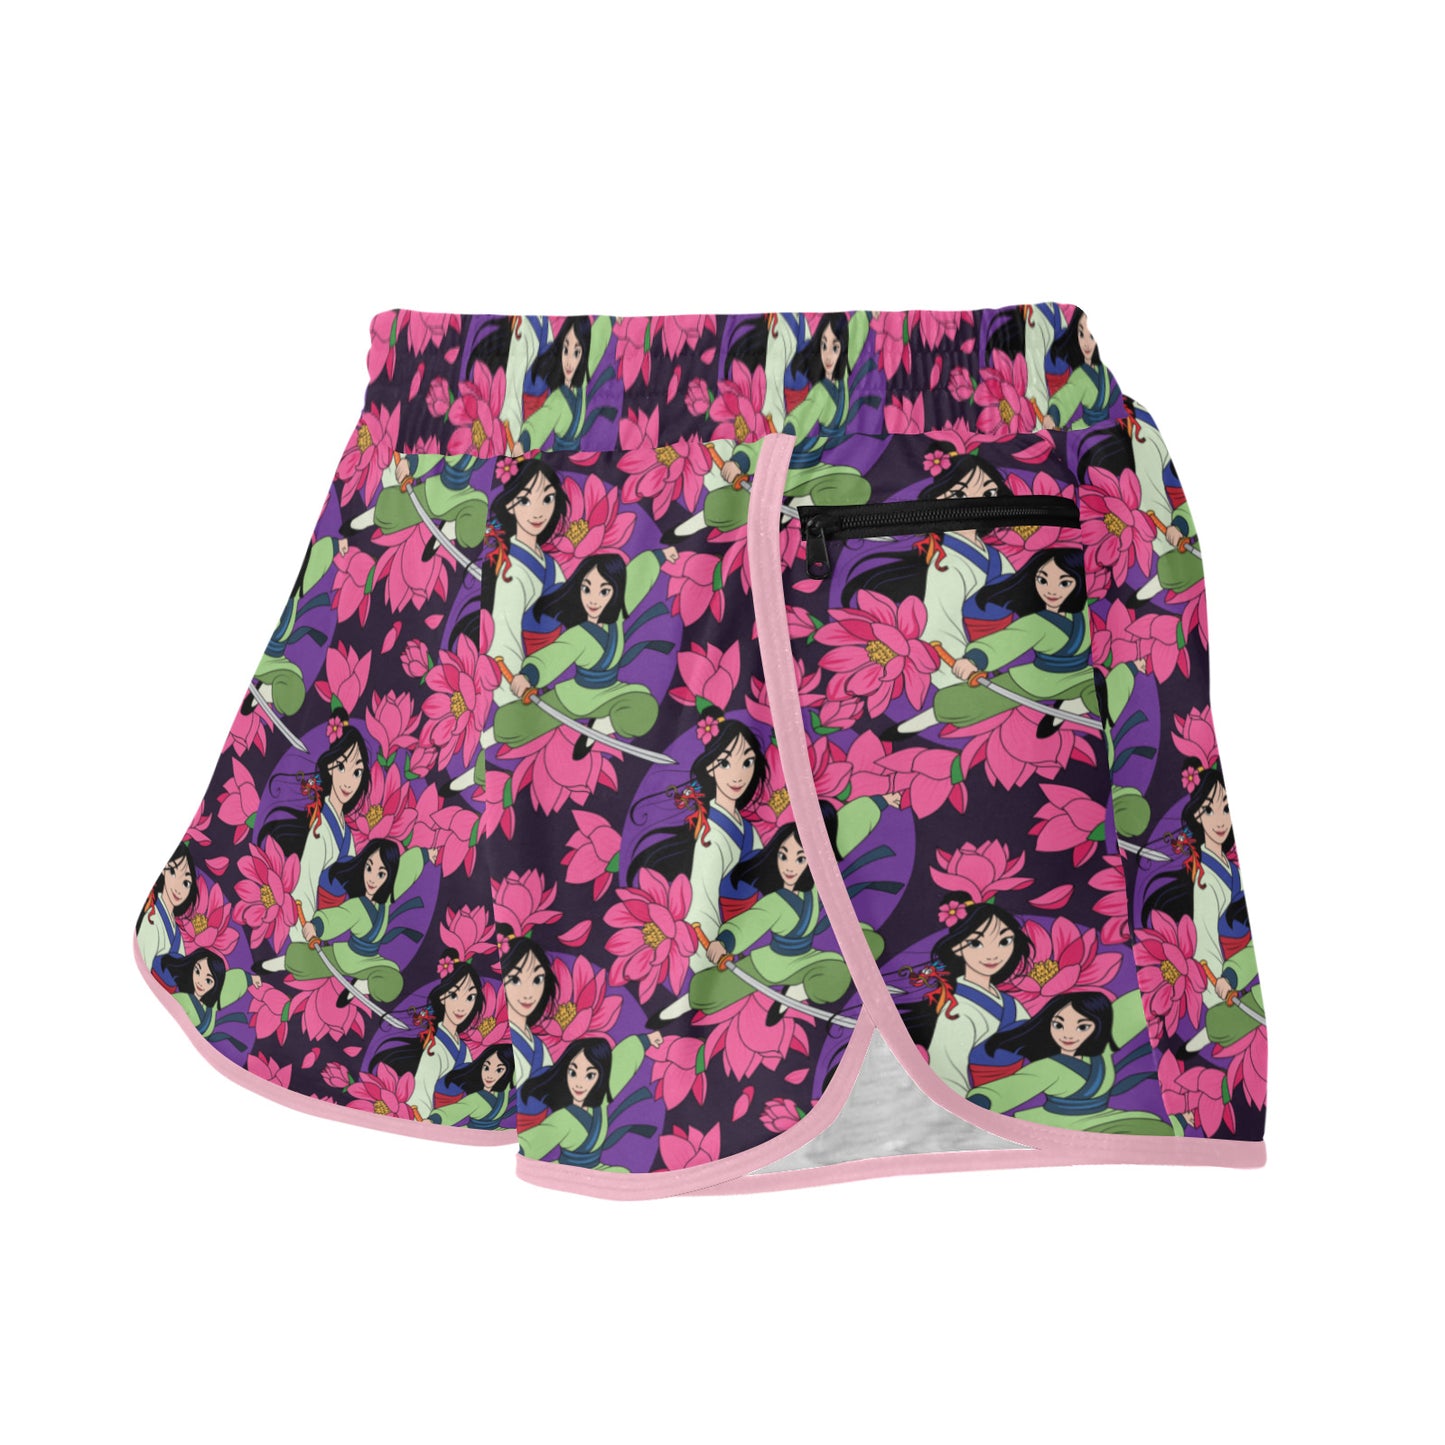 Blooming Flowers Women's Athletic Sports Shorts